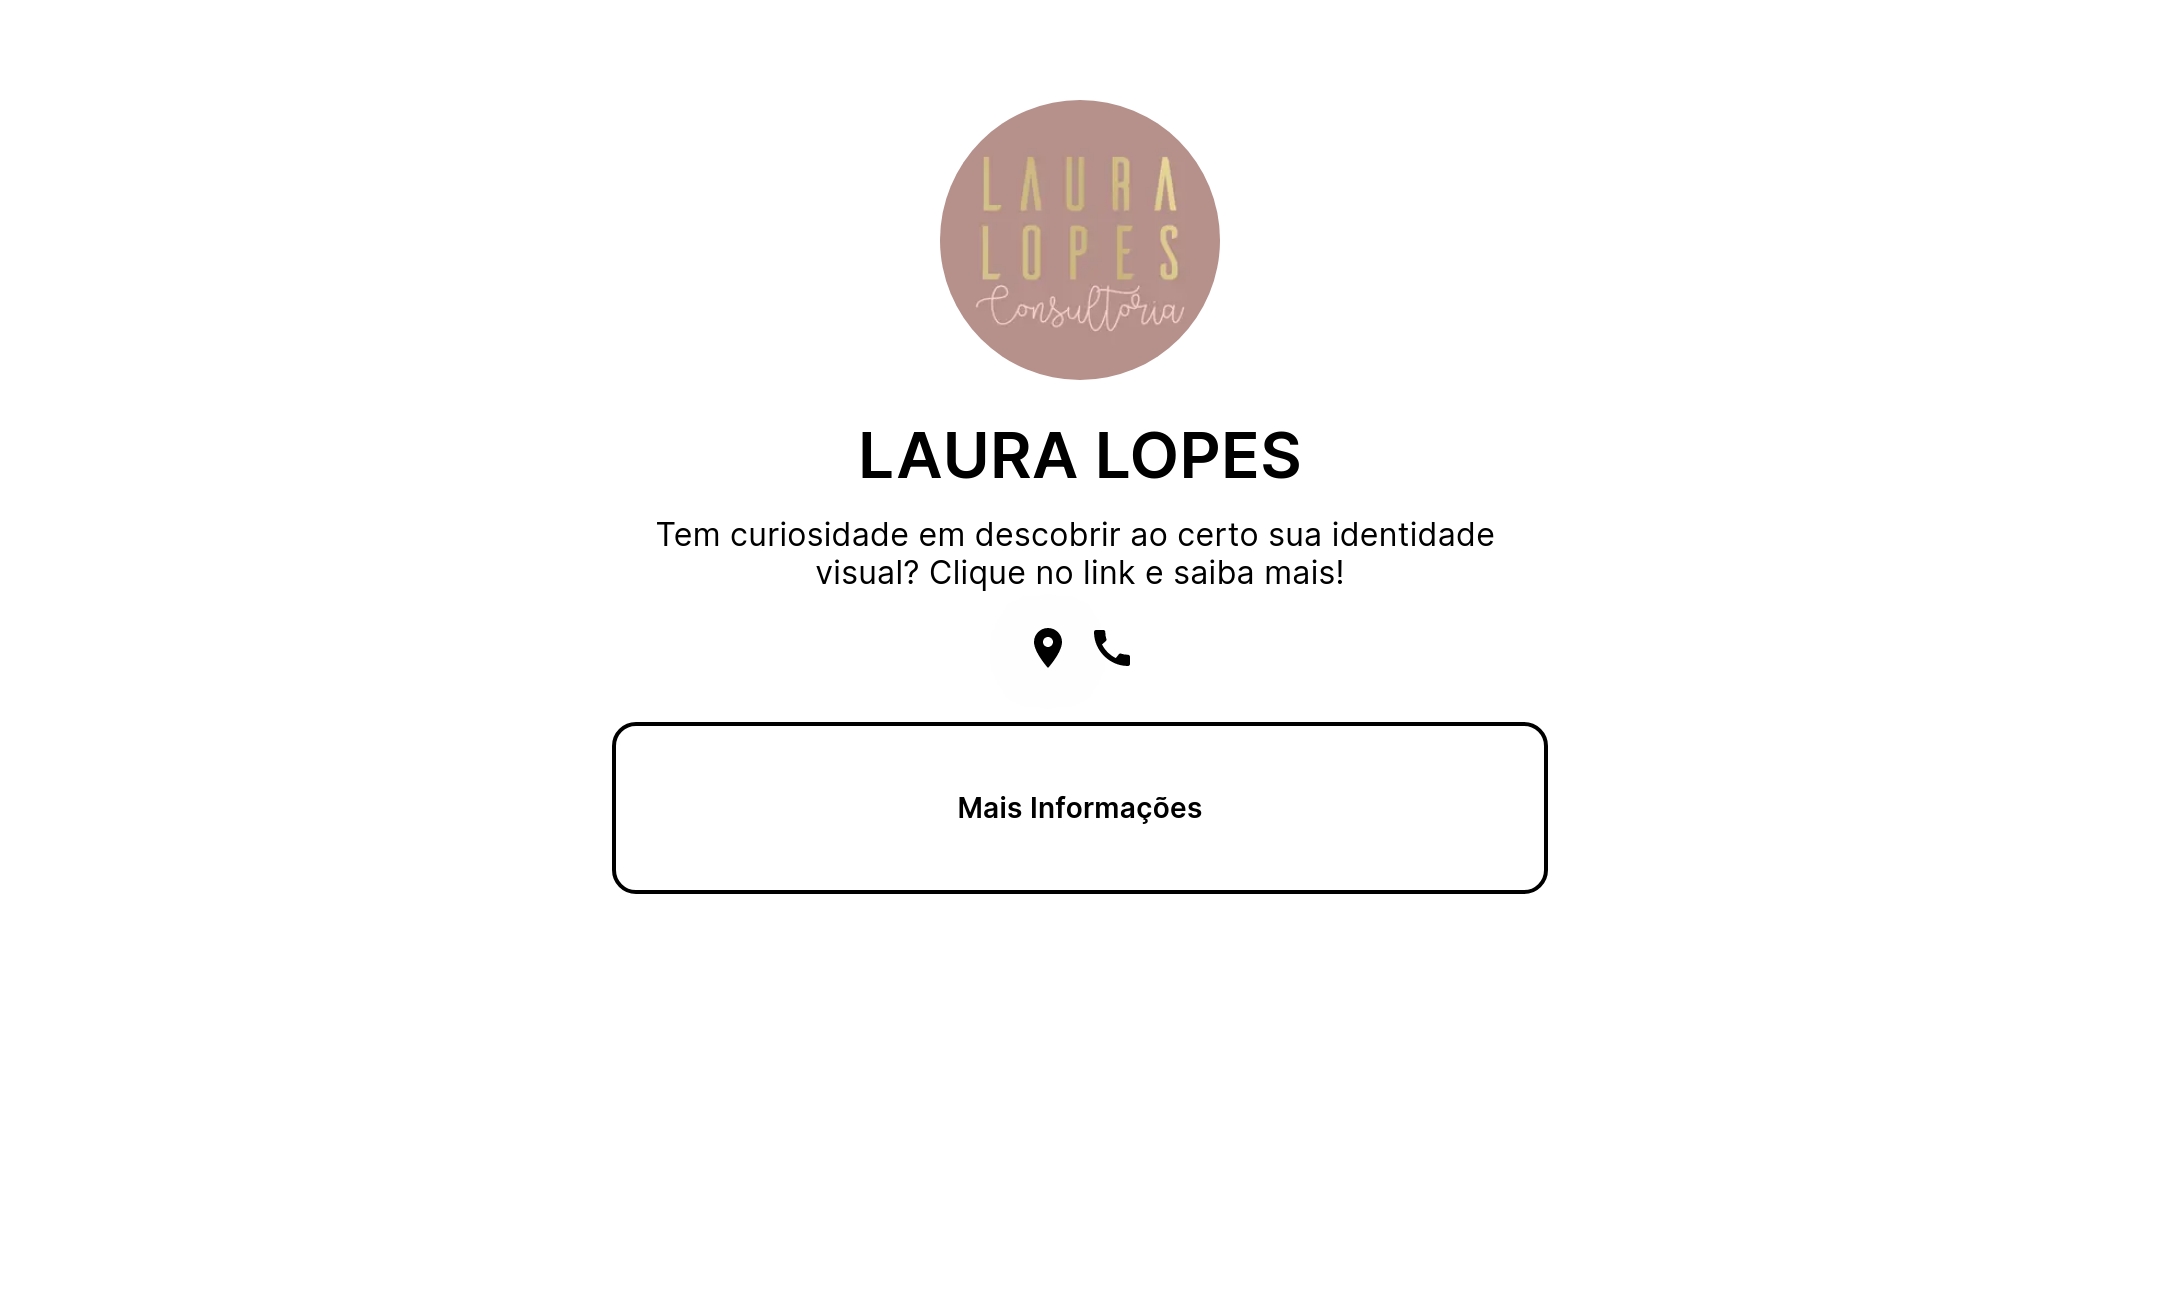 Laura Lopess Flowpage